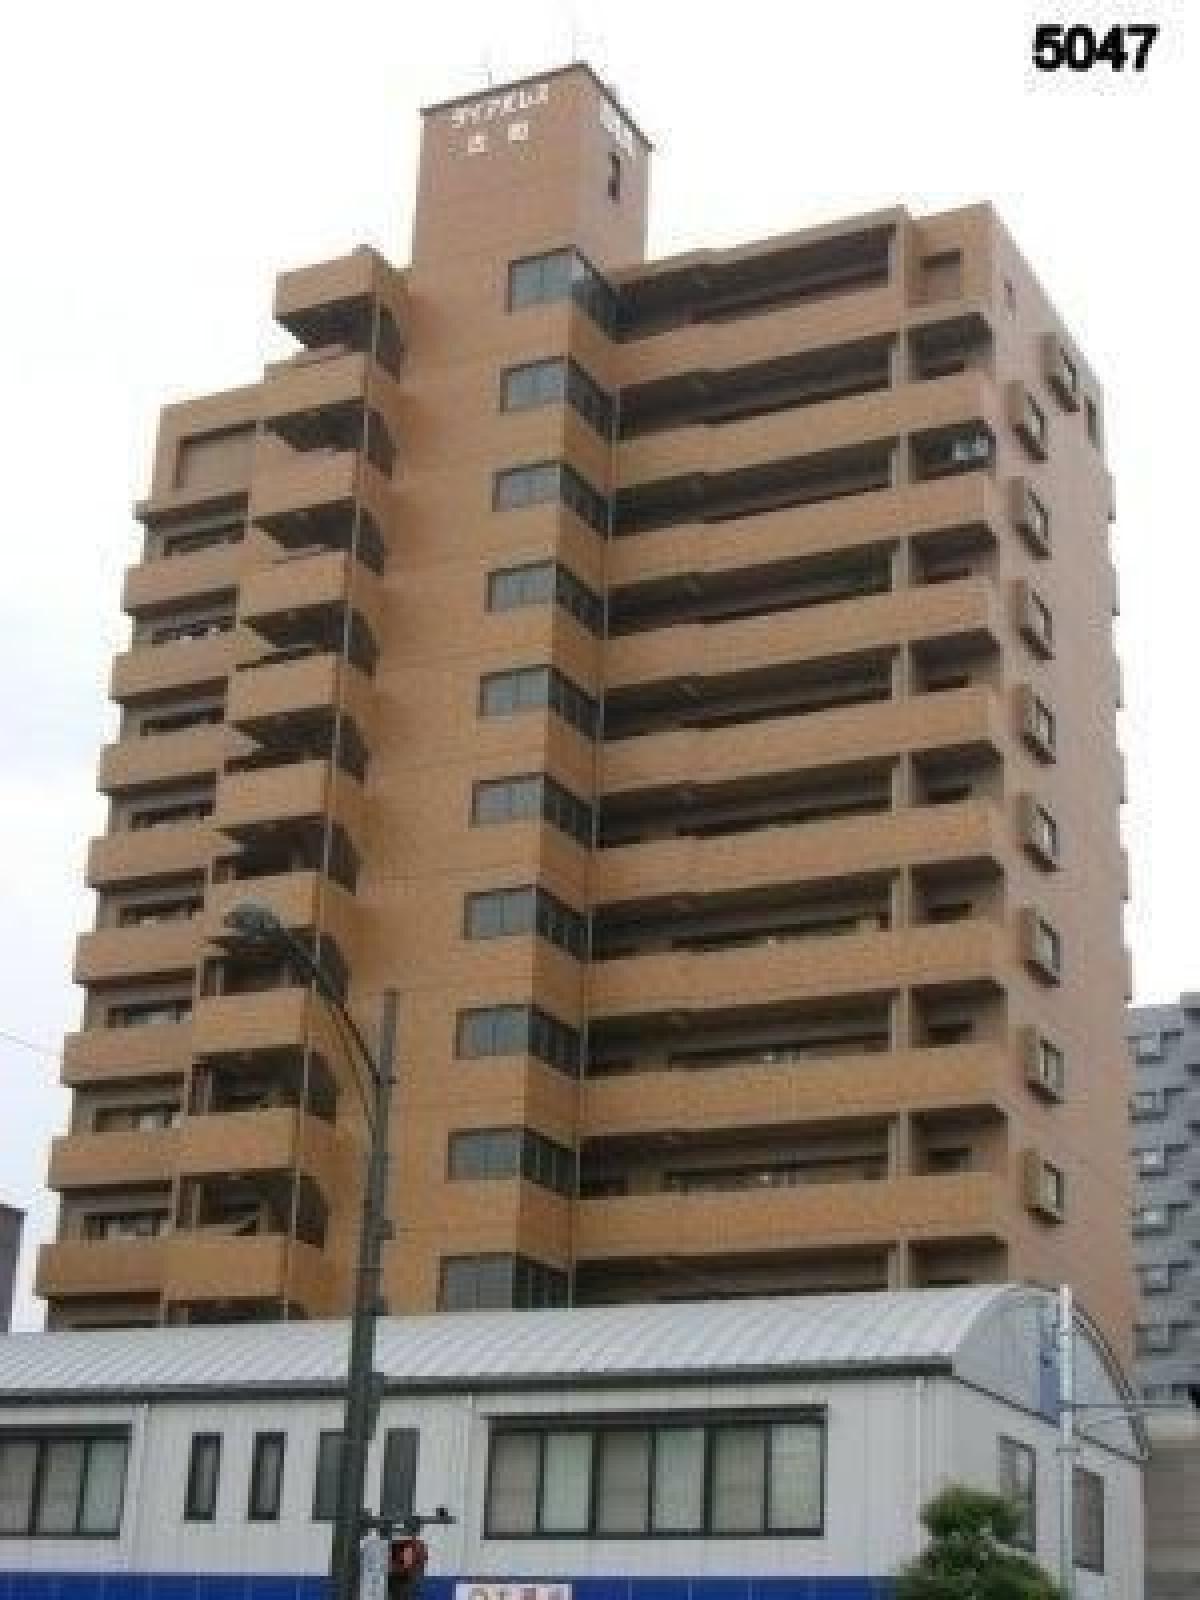 Picture of Apartment For Sale in Matsuyama Shi, Ehime, Japan